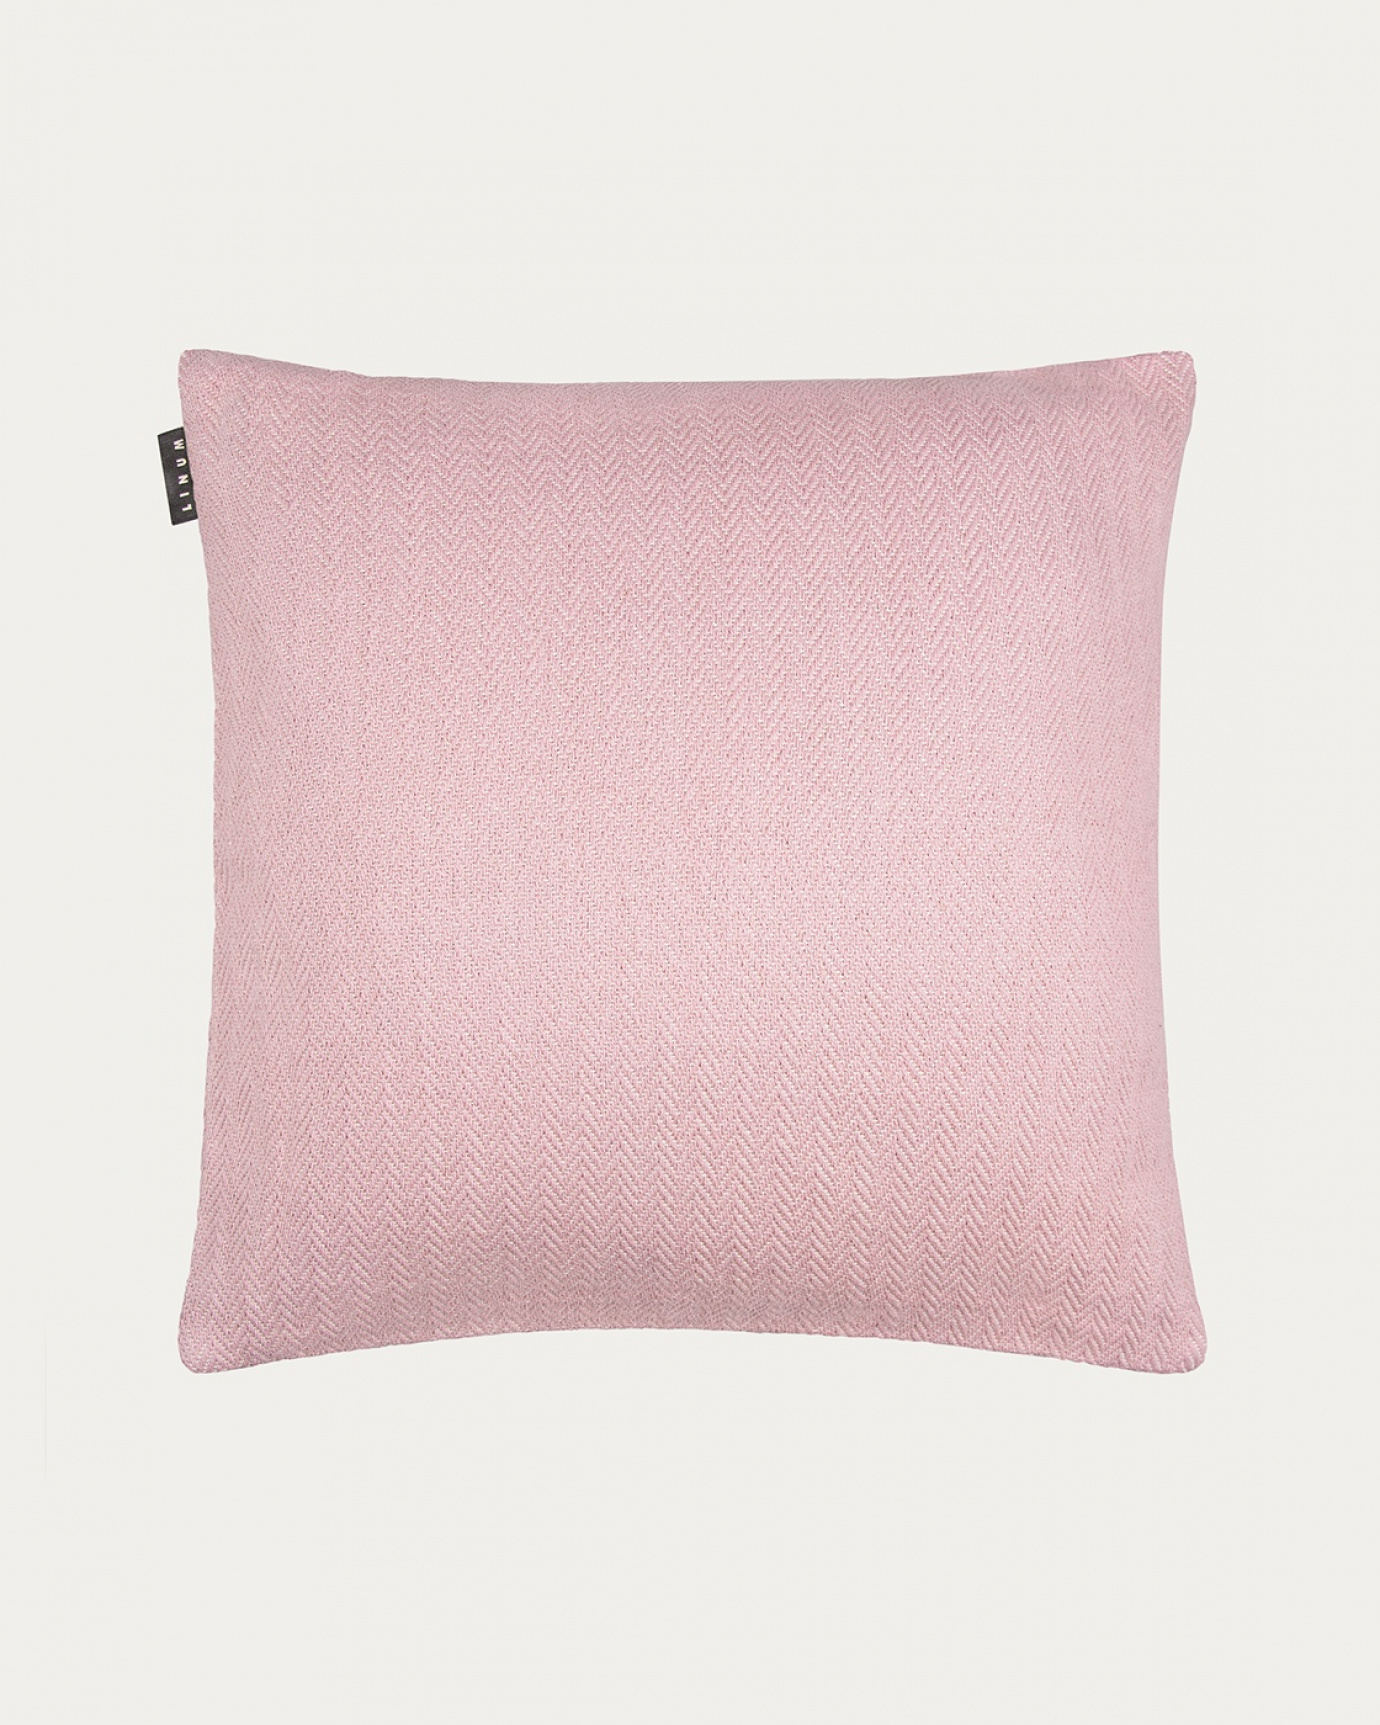 Product image dusty pink SHEPARD cushion cover made of soft cotton with a discreet herringbone pattern from LINUM DESIGN. Size 50x50 cm.